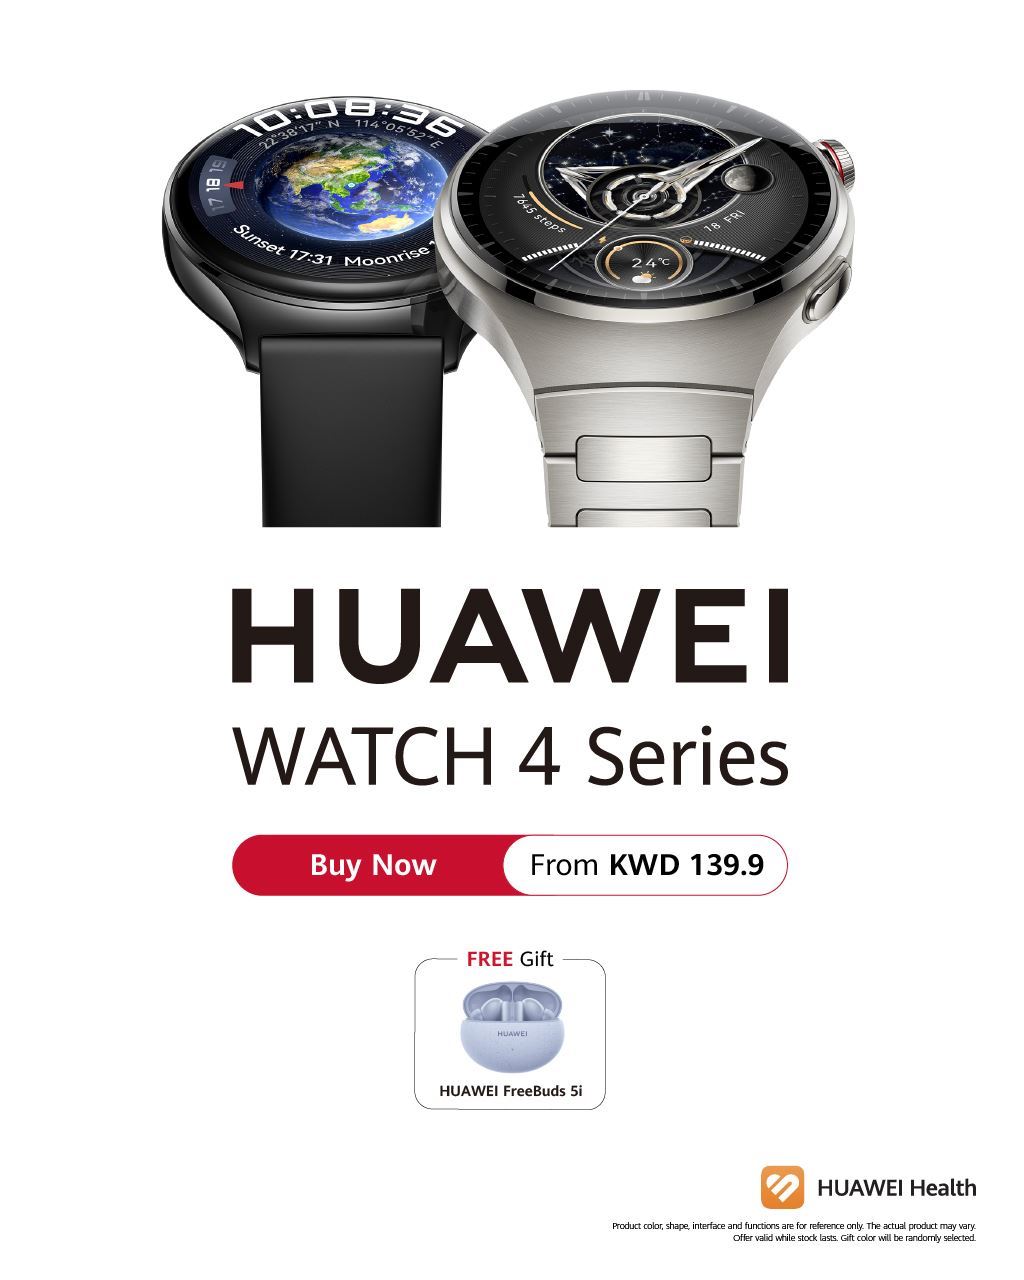 HUAWEI WATCH 4 Series Now Available in Kuwait